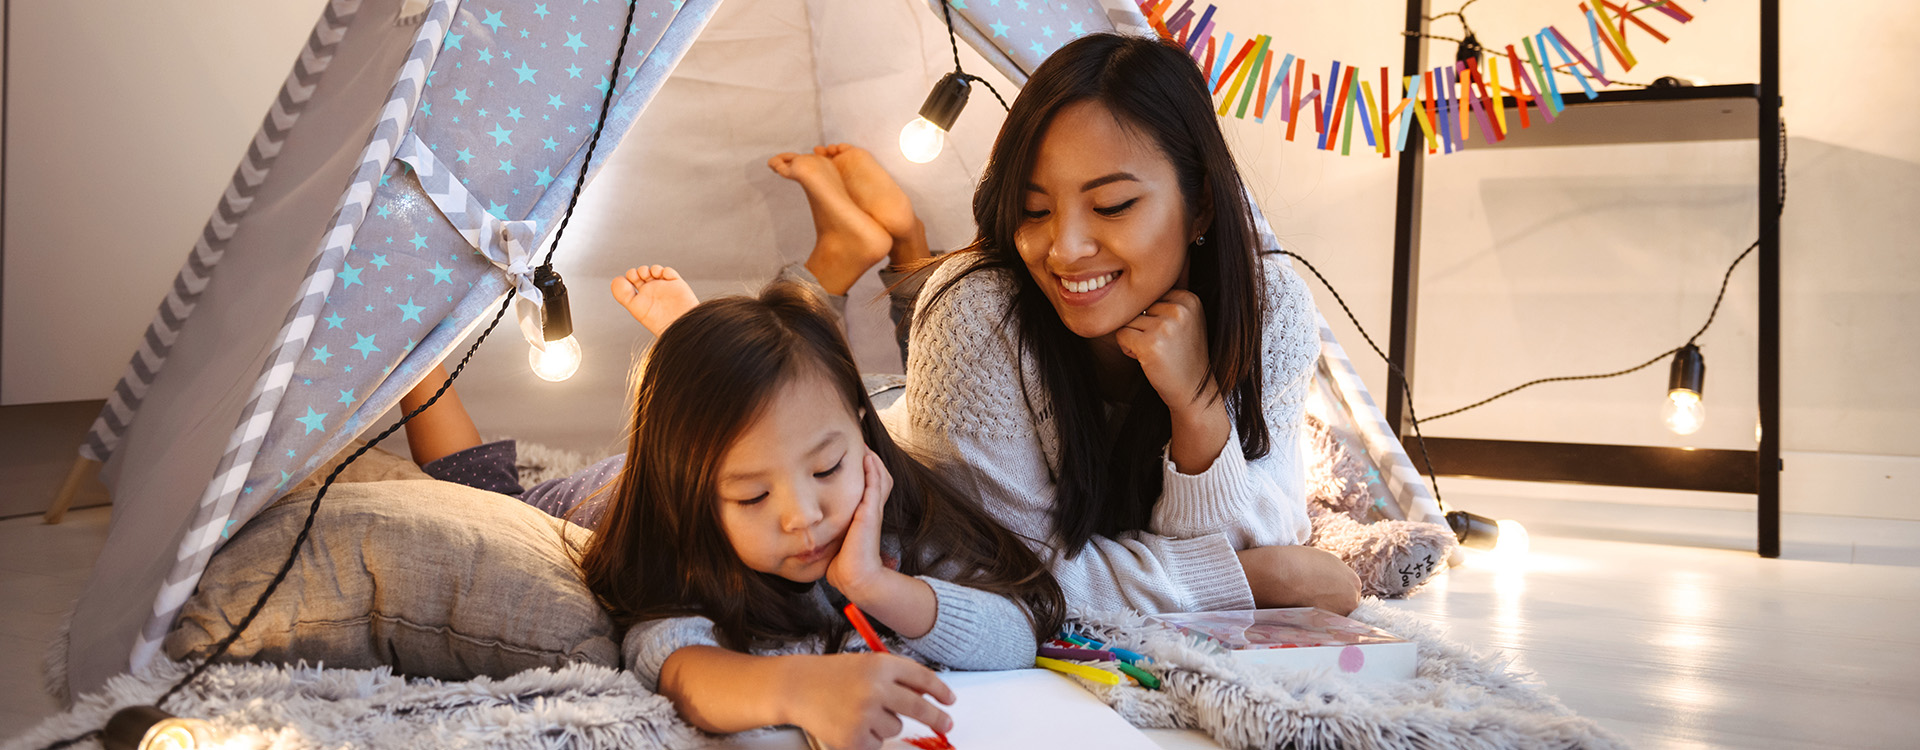 Image of a beautiful young asian woman with her little daughter having fun drawing in album on floor.